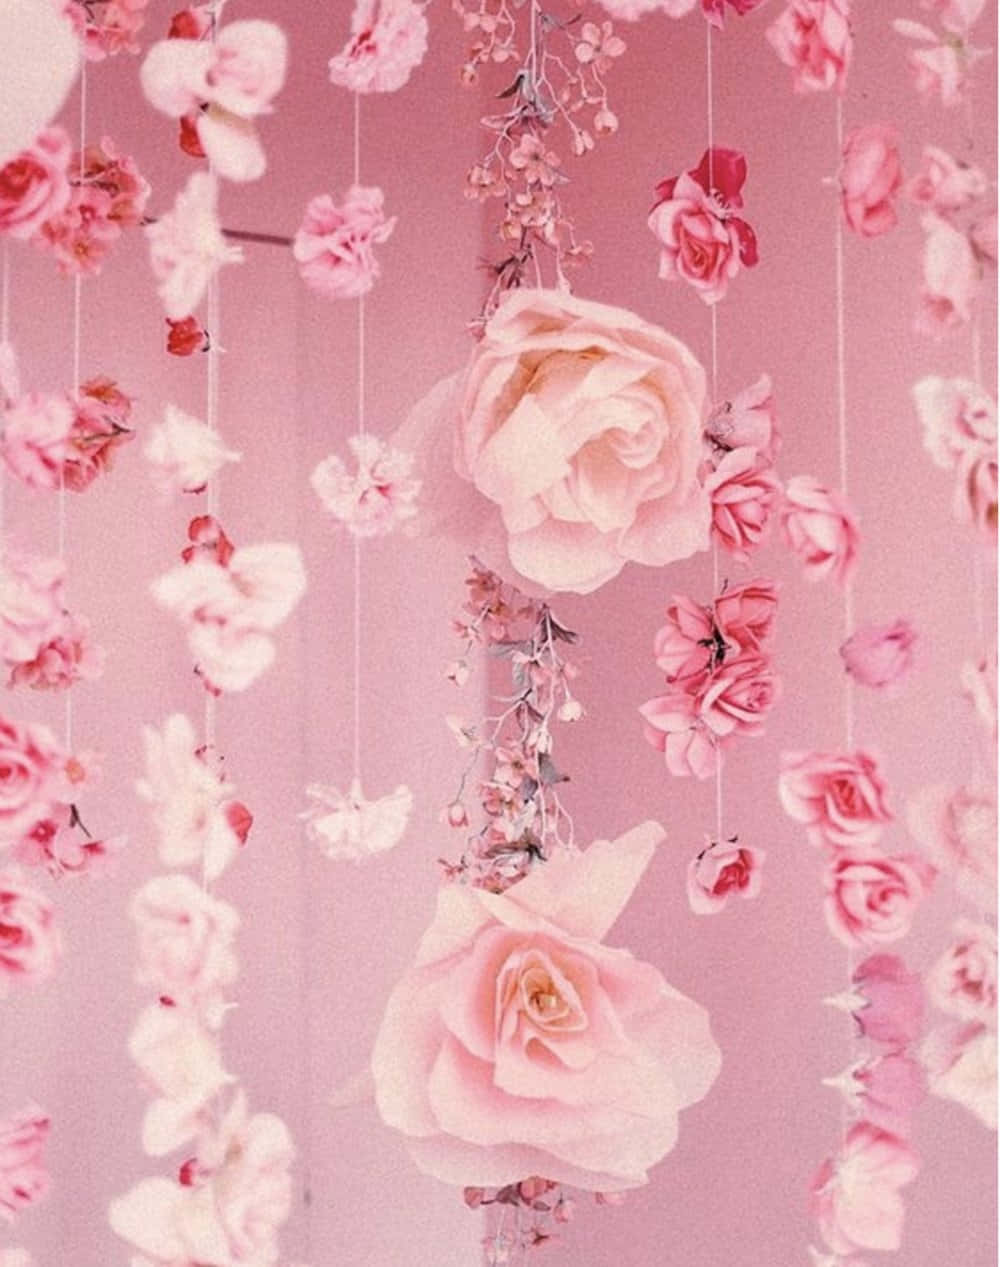 A Radiant Aesthetic Rose Background